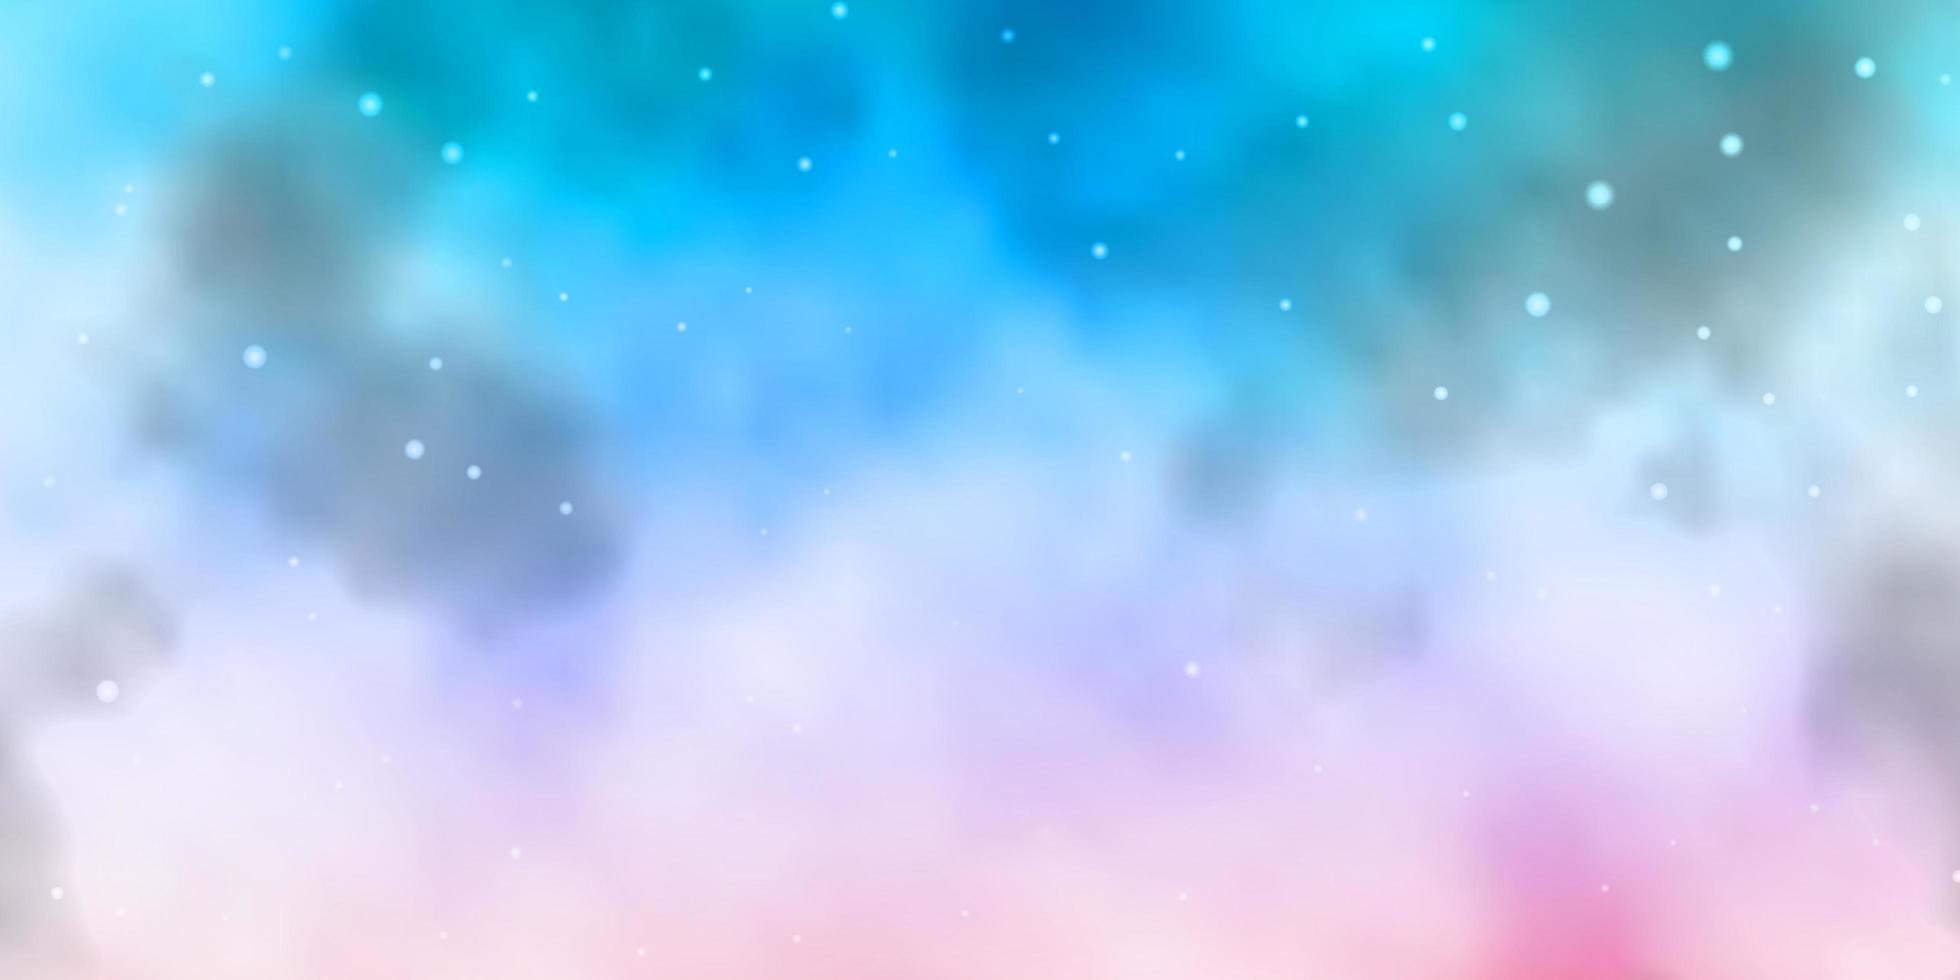 Light Blue, pink background with colorful stars. vector